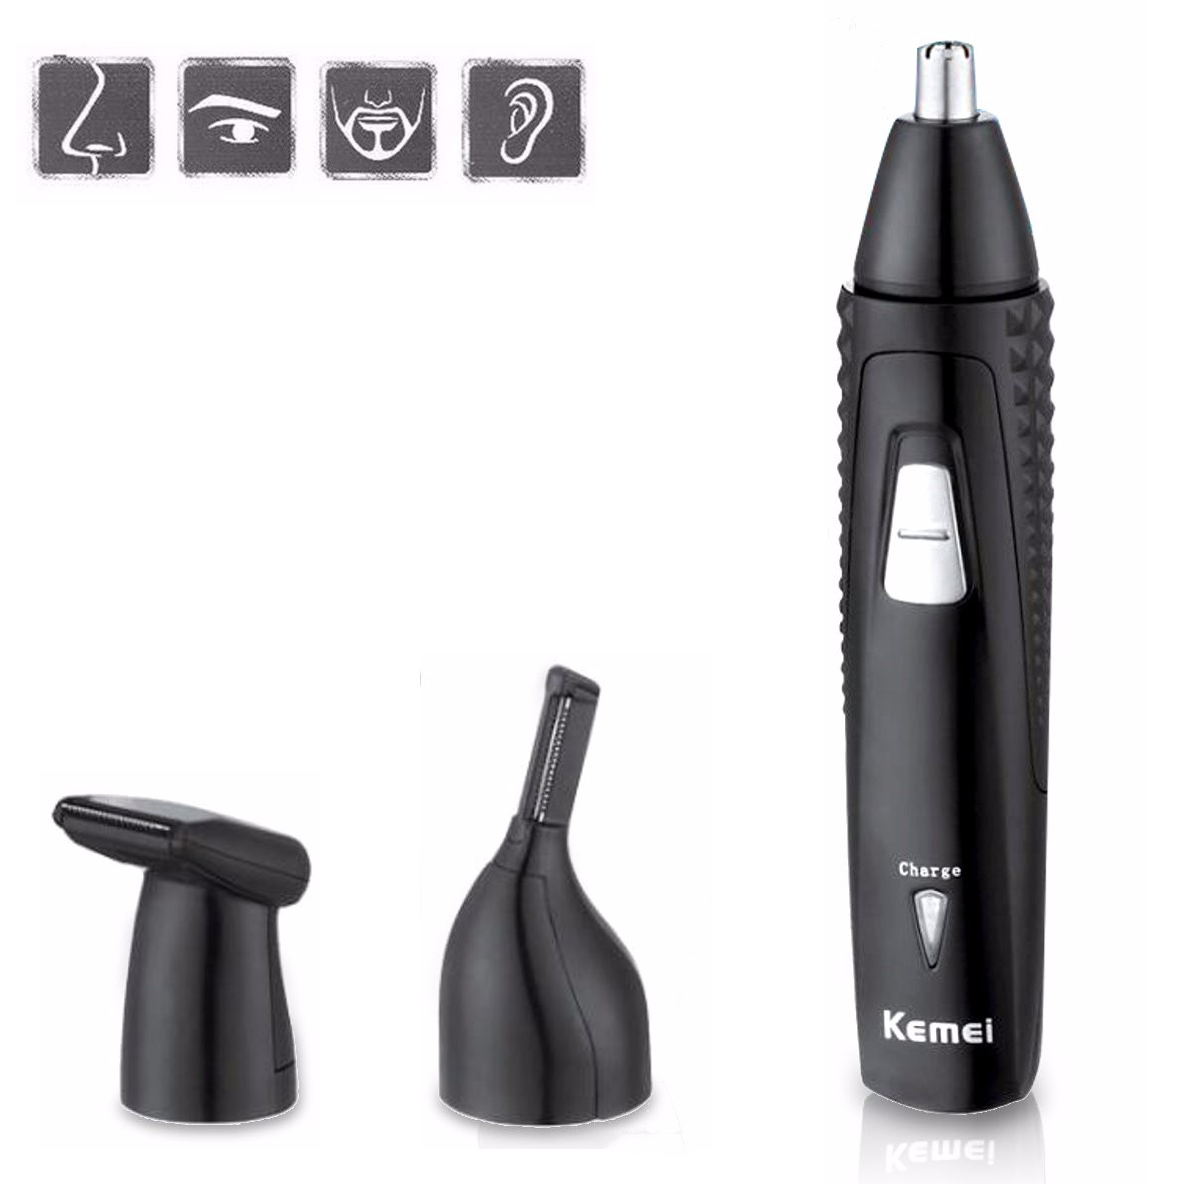 

Kemei KM-309 3 in One Men's Ear Nose Brow Hair Trimmer Removal Shaver Clipper Gifts